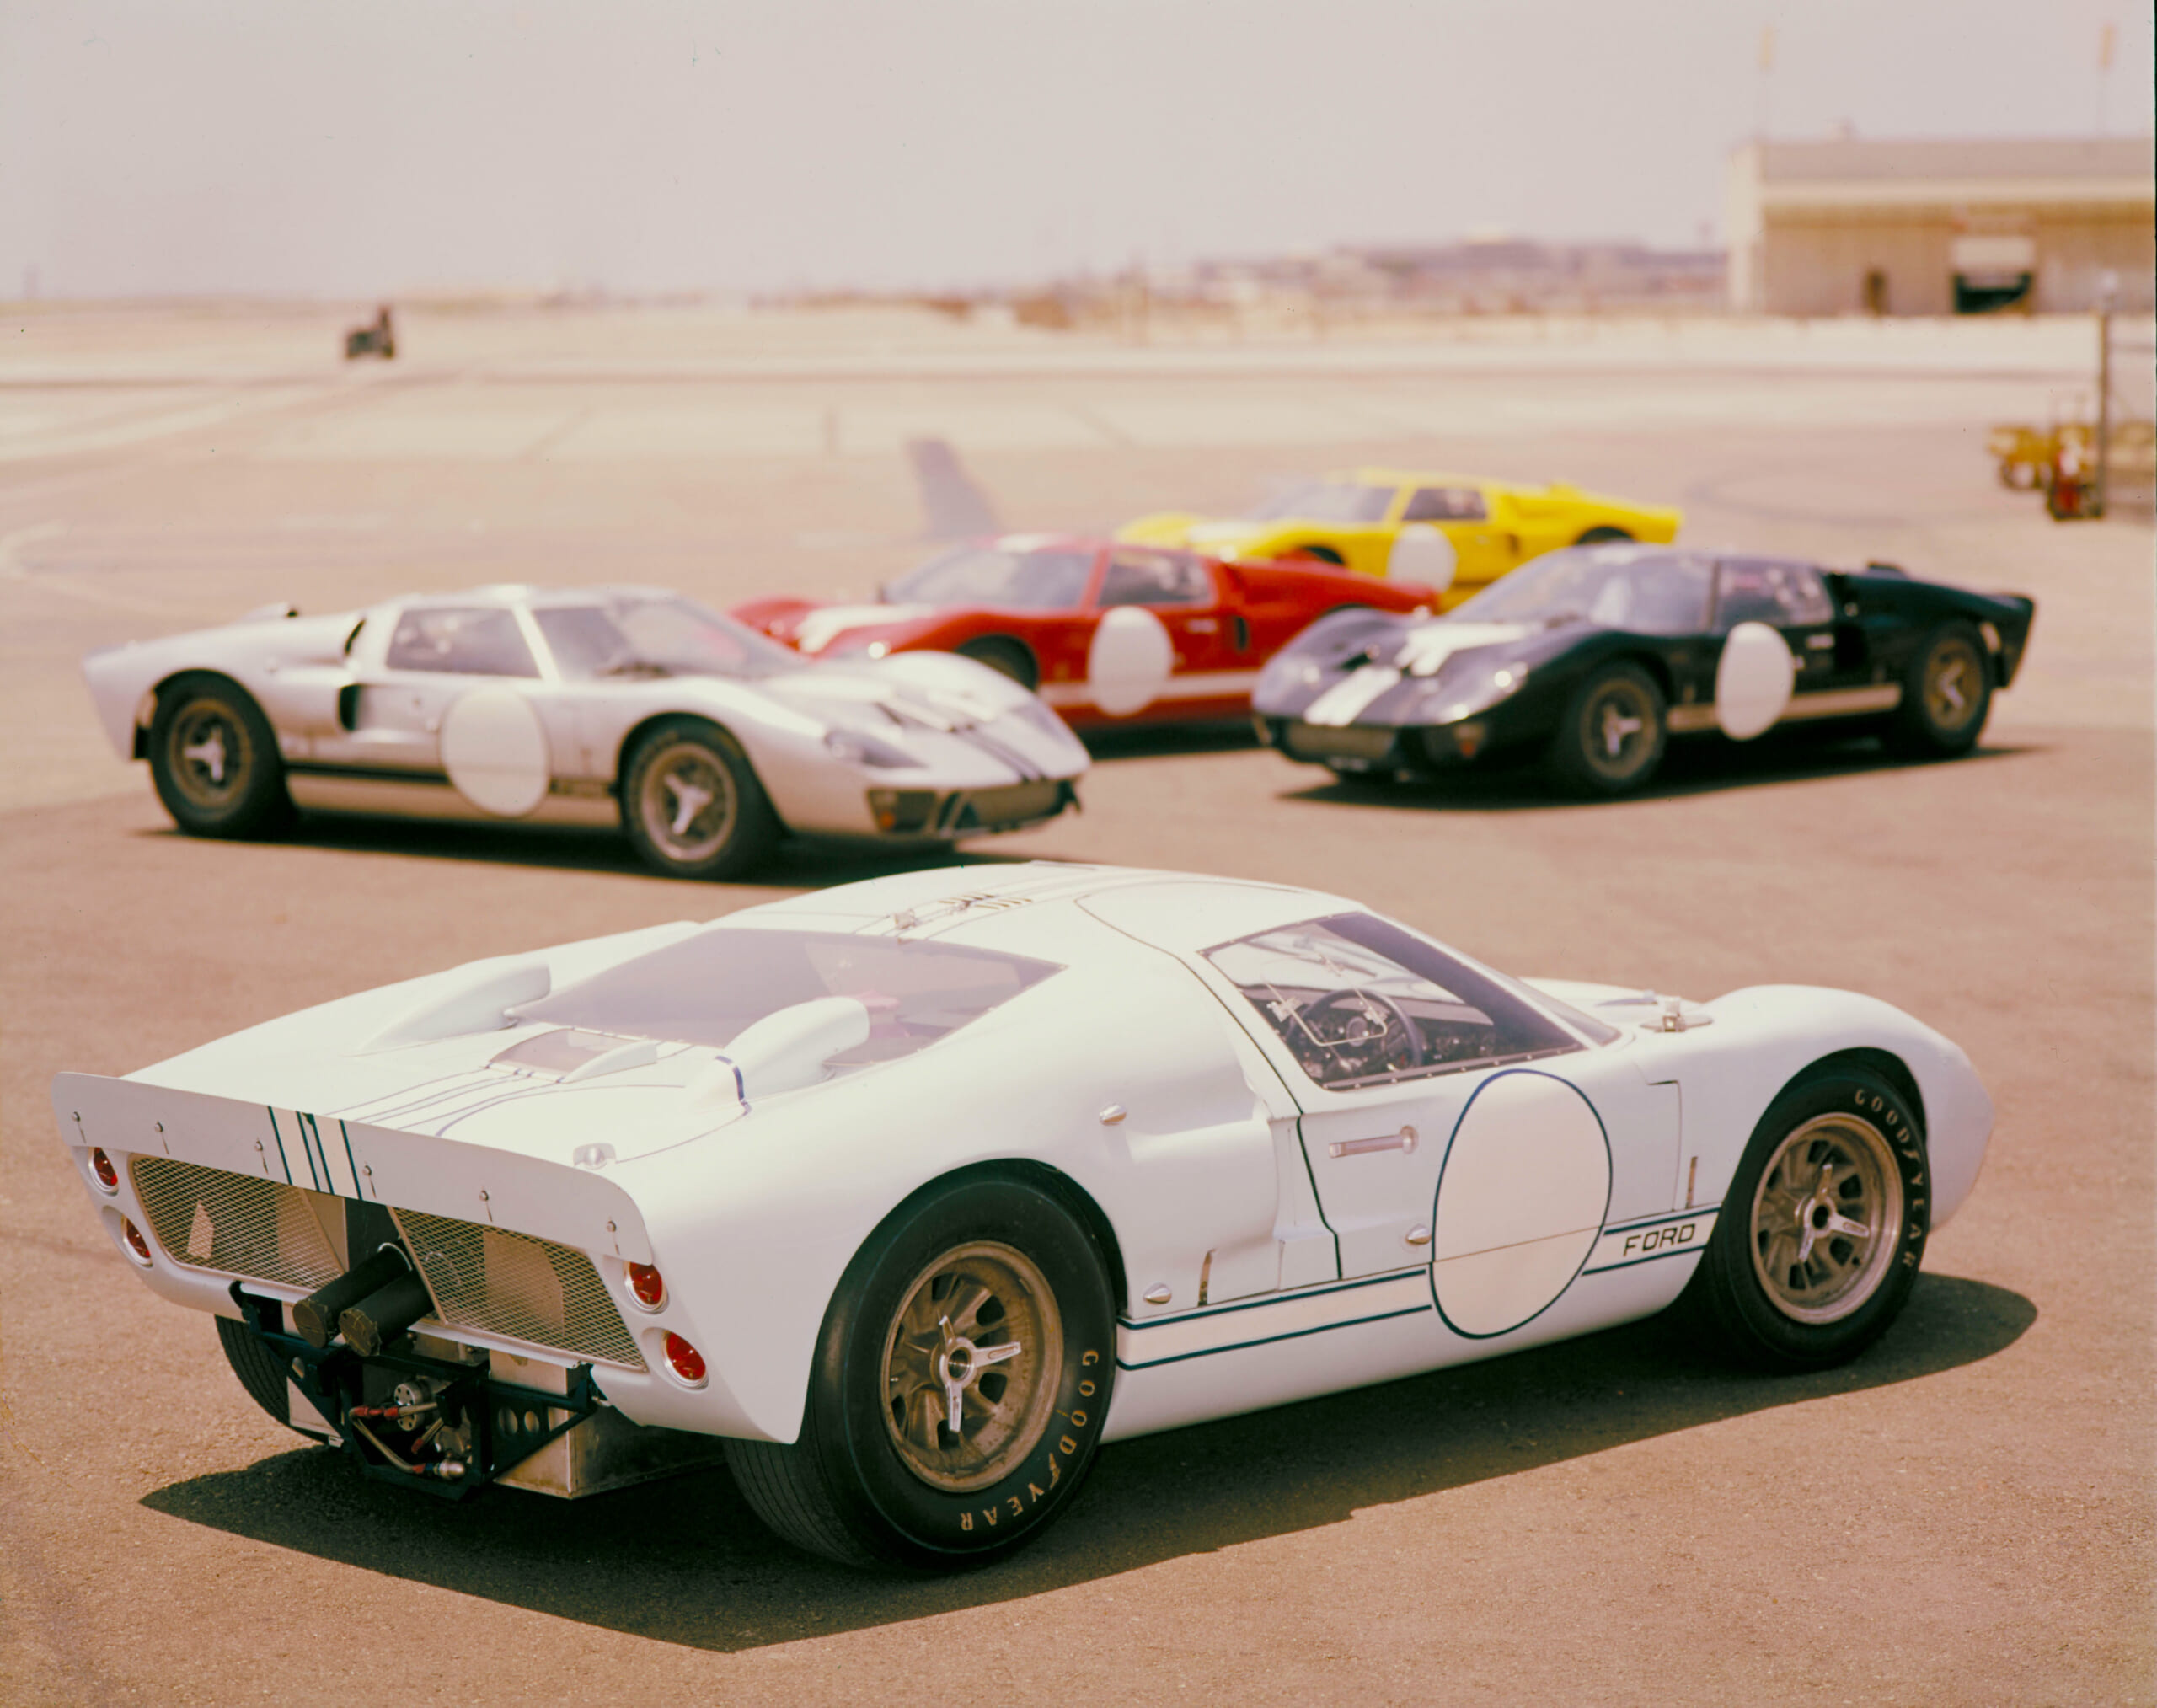 The legend of the Ford GT40